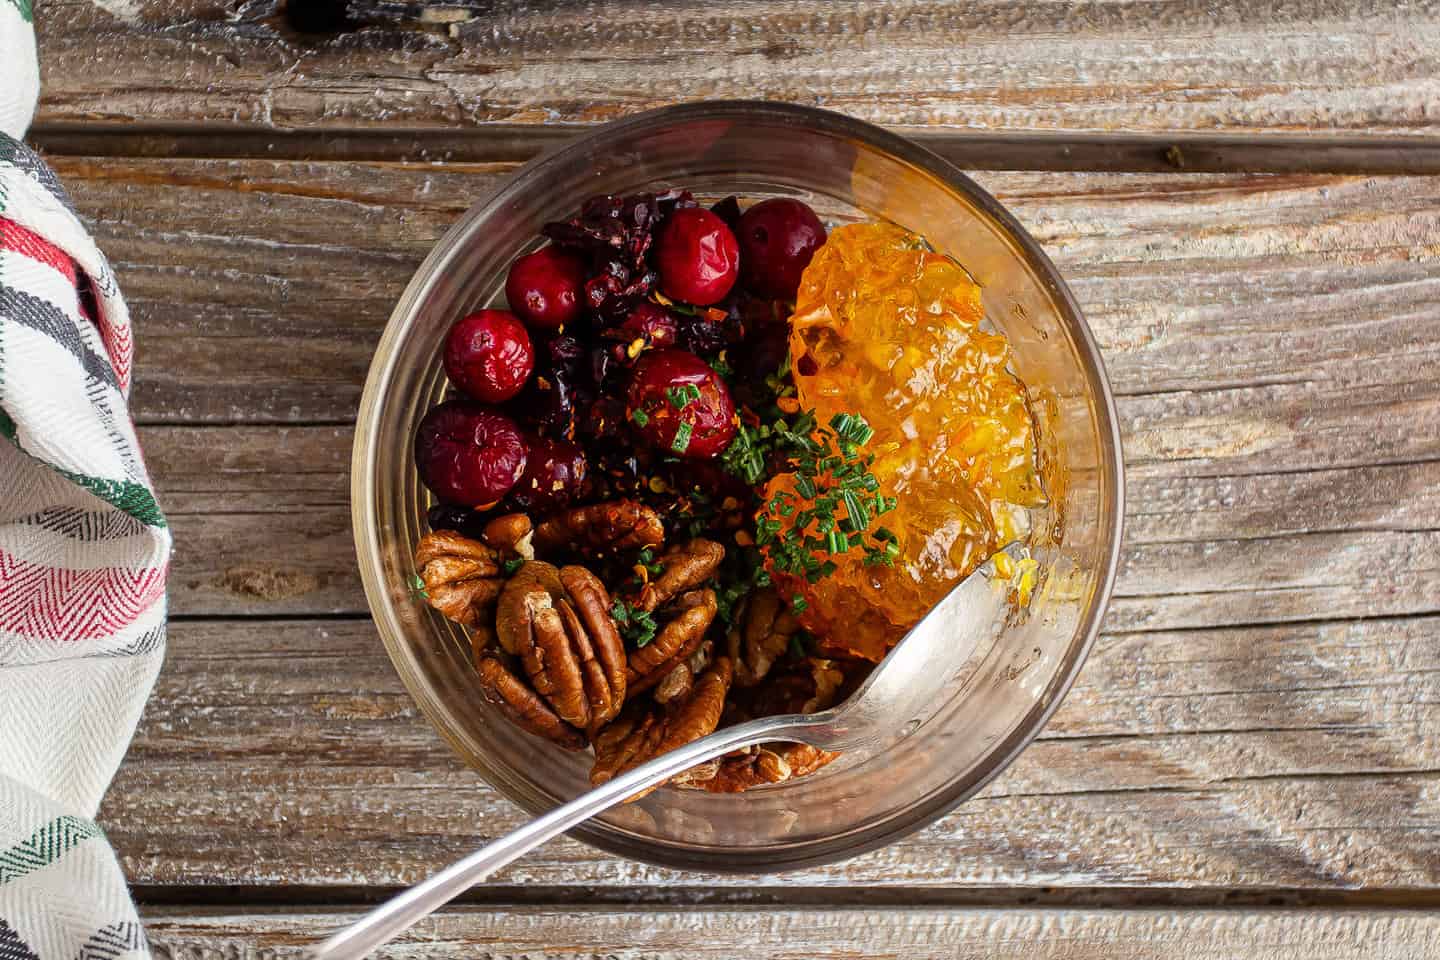 Cranberries, pecans, marmalade, rosemary, and crushed red pepper flakes, in a glass bowl.